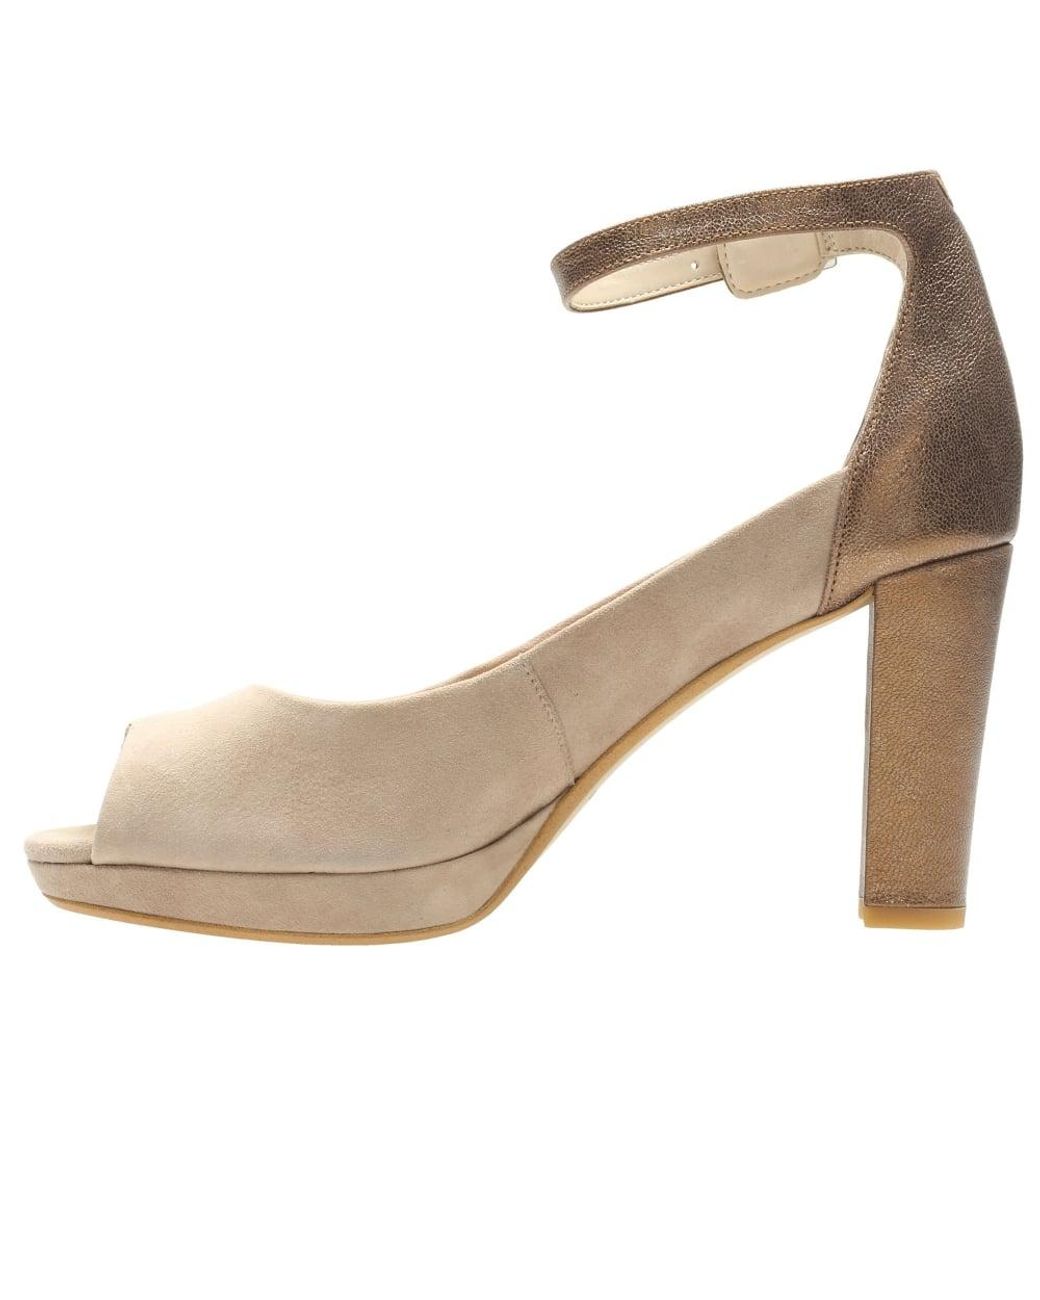 Clarks Kendra Ella Womens Shoes in Natural | Lyst UK